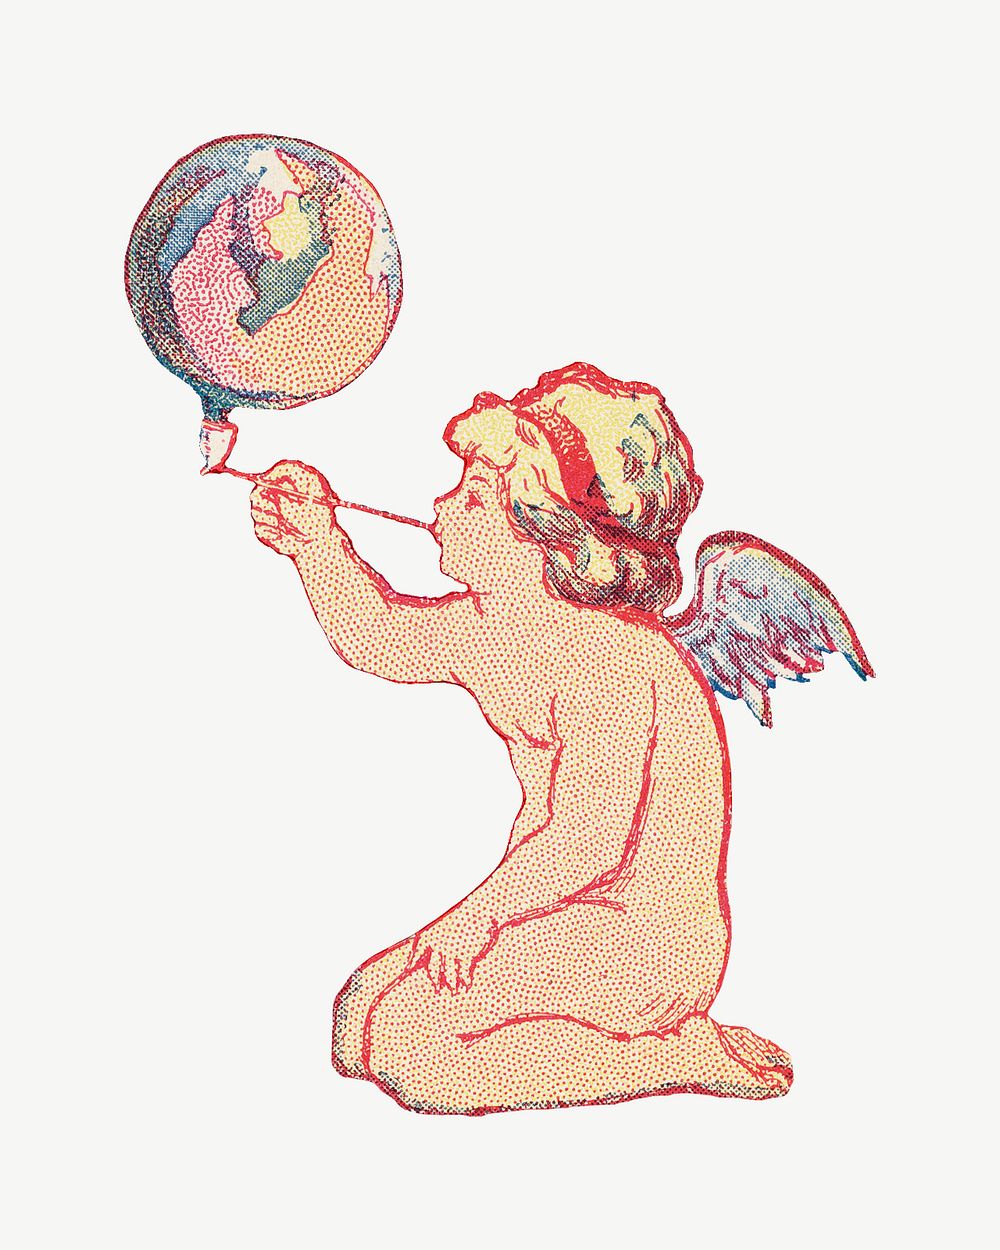 Cupid blowing bubble, vintage illustration by Wells, Richardson & Co psd.  Remixed by rawpixel. 